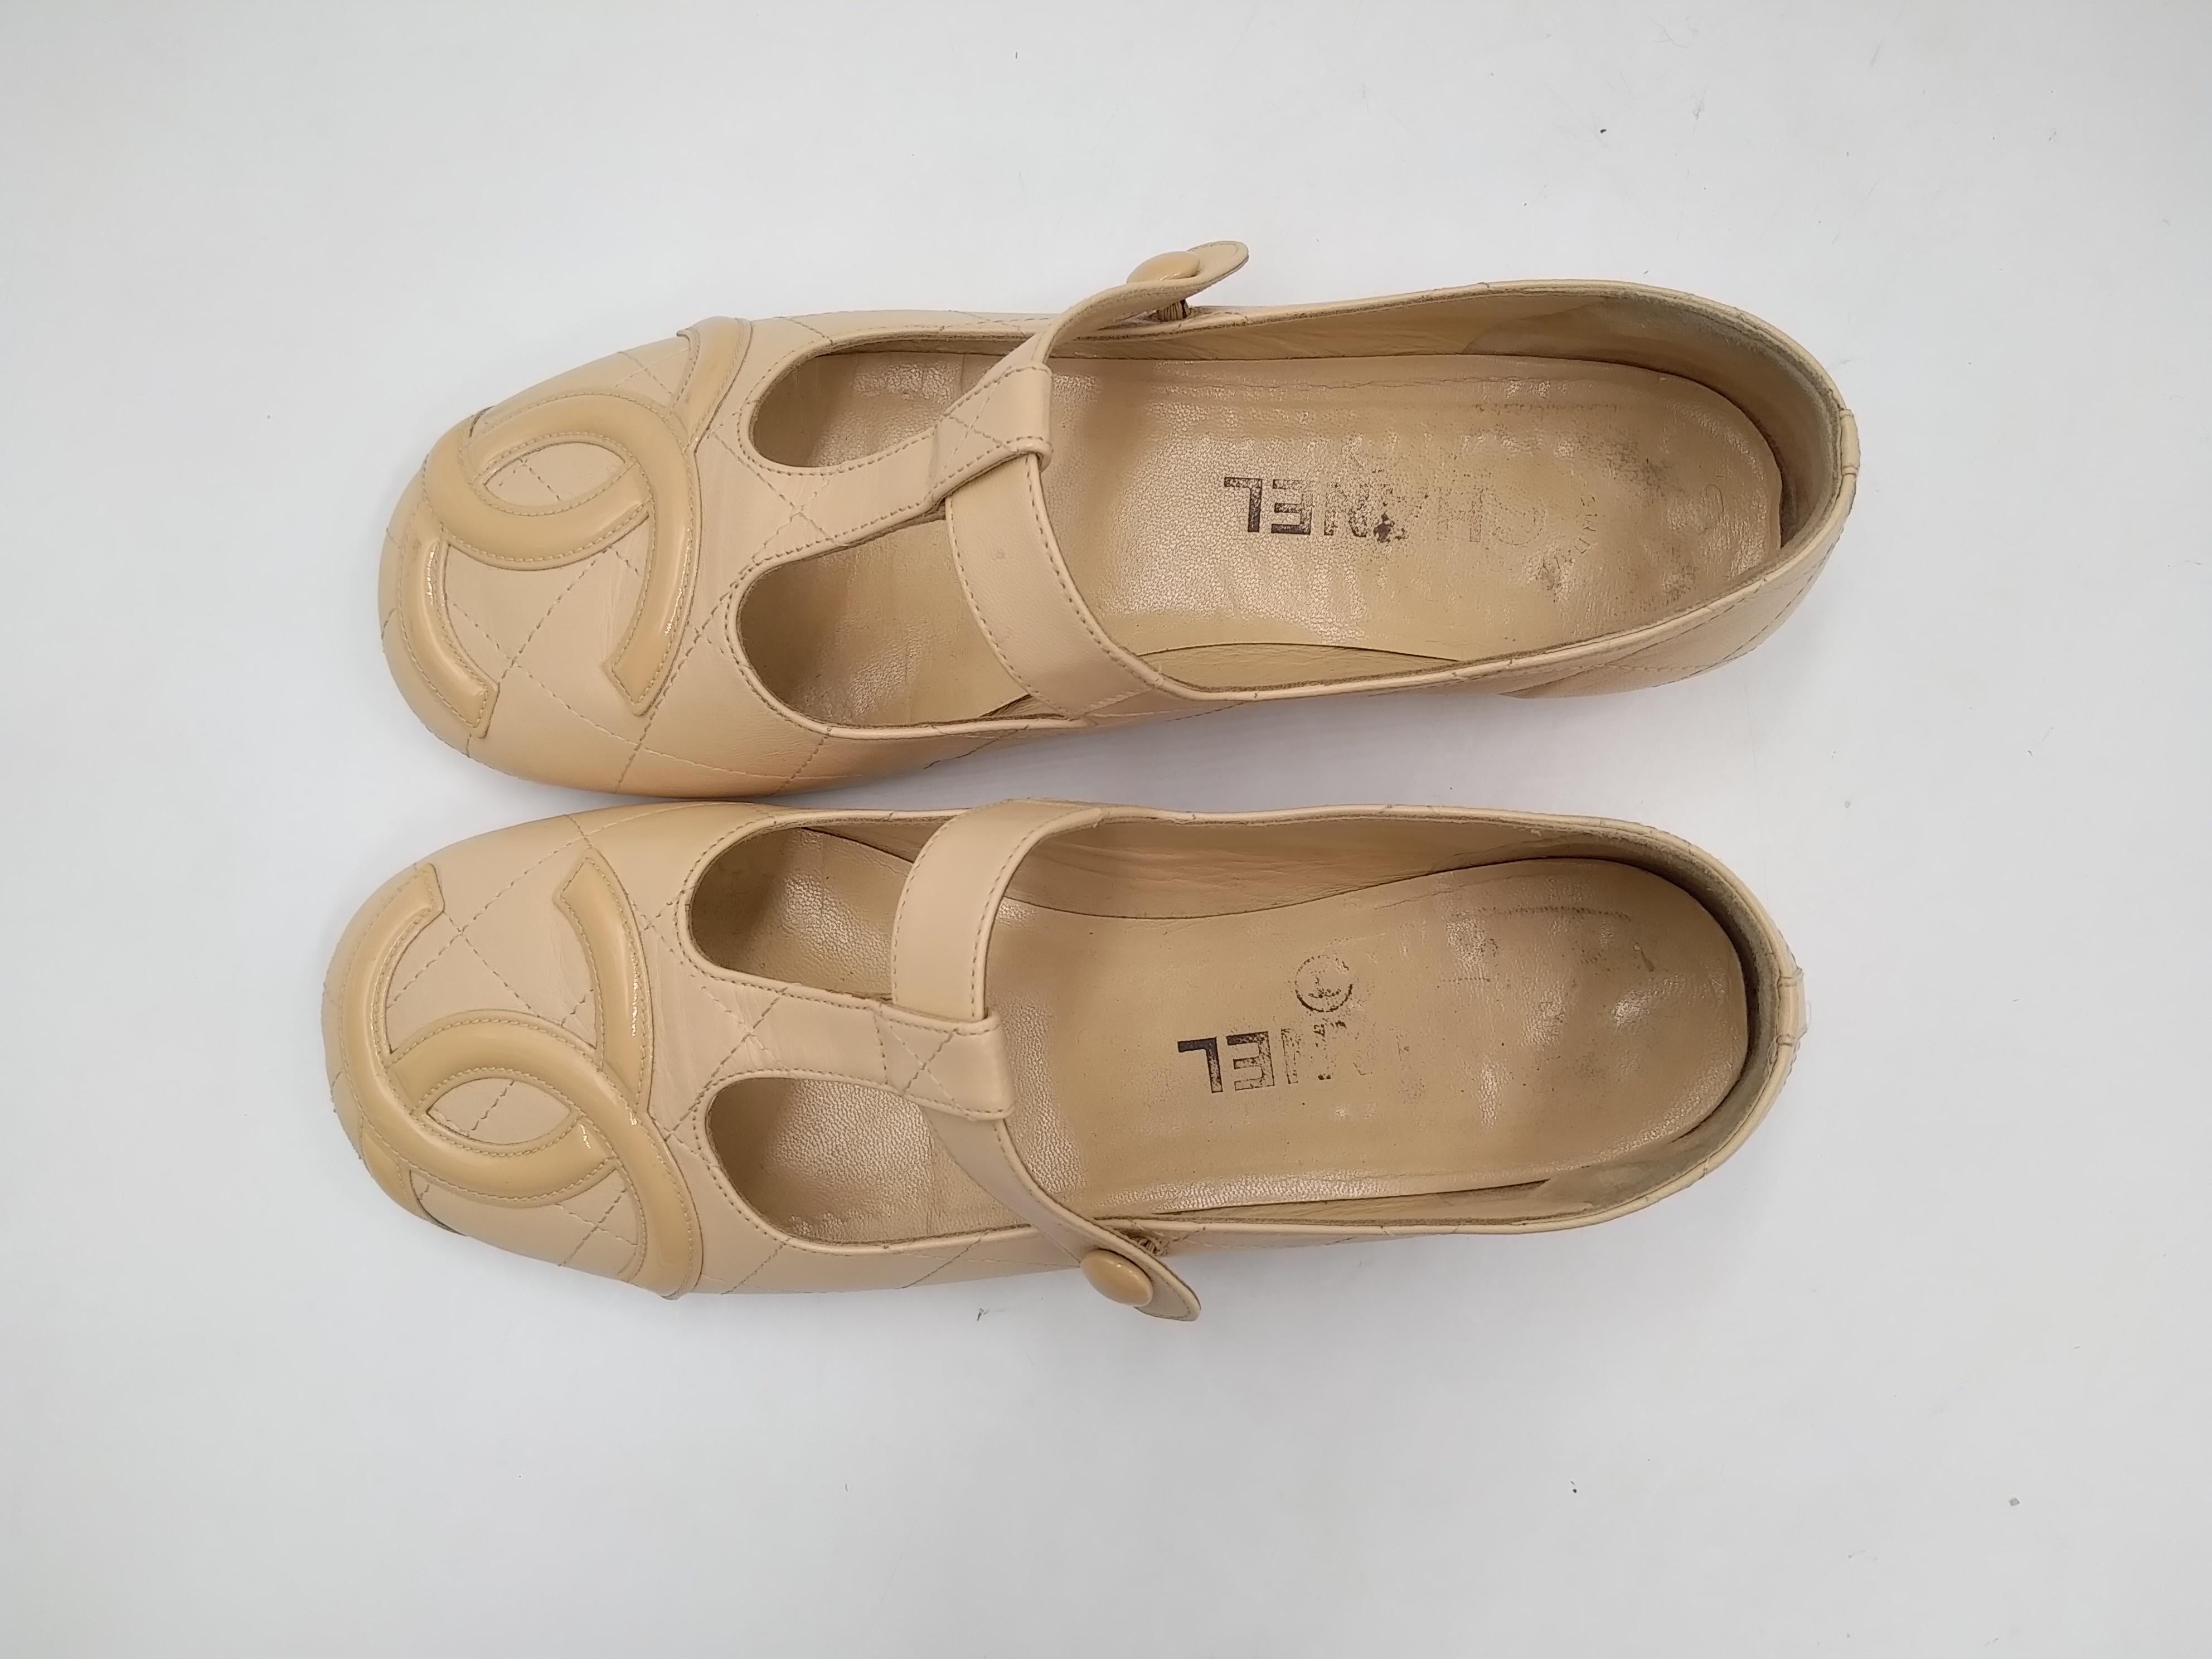 Chanel Beige Quilted Cambon Leather Mary-Jane Flats, Size EU 38/7.5
- 100% authentic Chanel
- Beige quilted leather
- Rubber sole
- Heel to Toe Length: cm 24
- Size: US Size 7.5/Euro Size 38